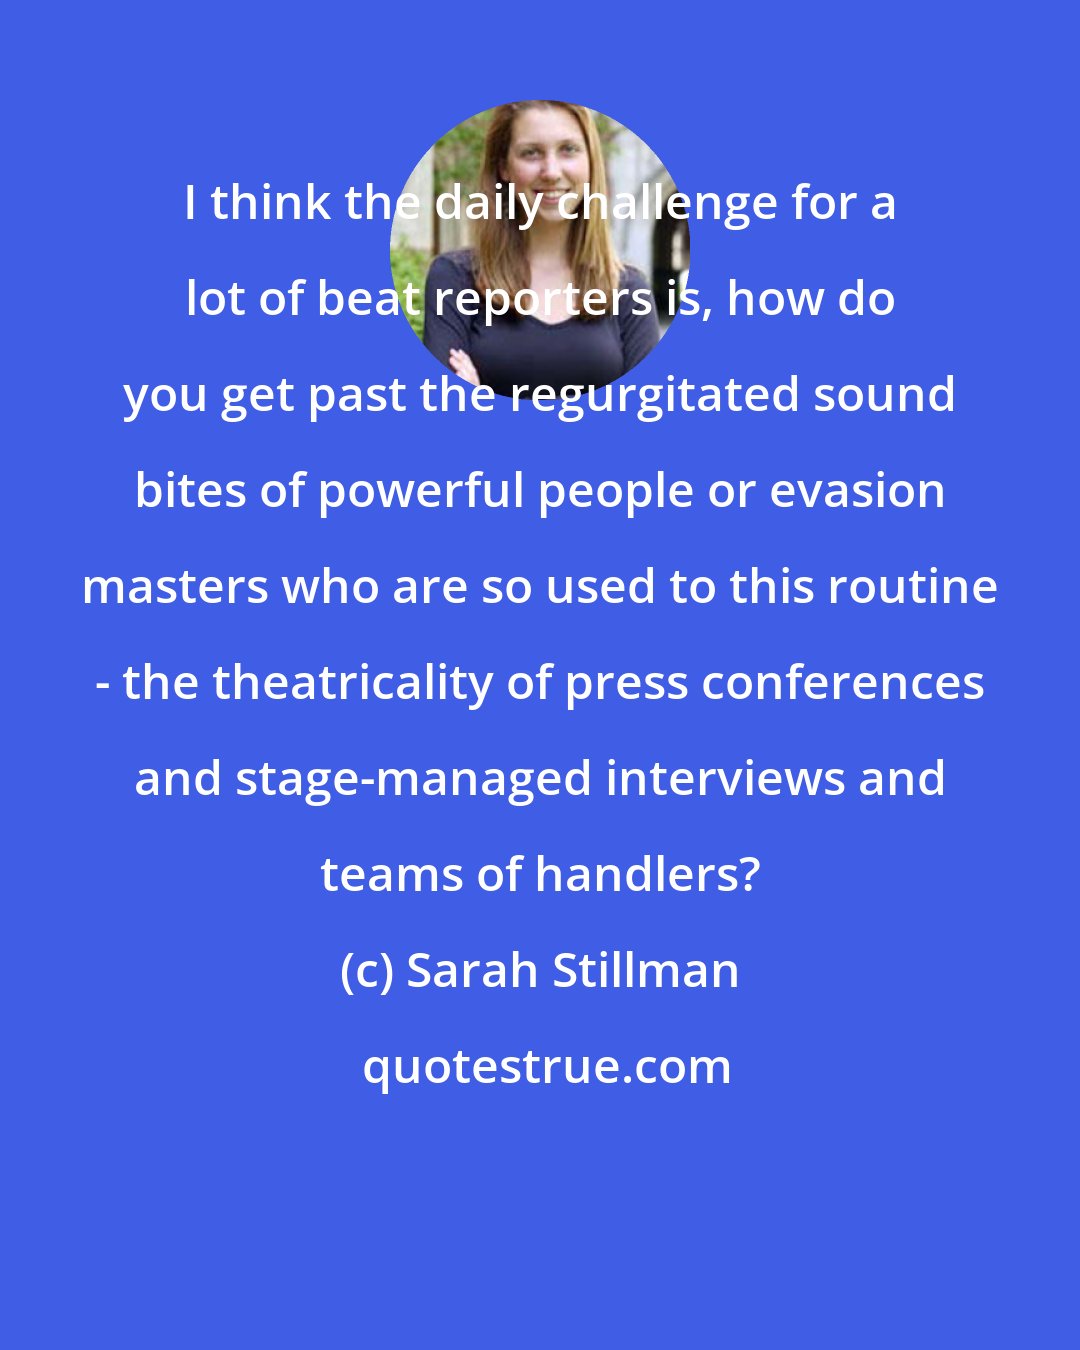 Sarah Stillman: I think the daily challenge for a lot of beat reporters is, how do you get past the regurgitated sound bites of powerful people or evasion masters who are so used to this routine - the theatricality of press conferences and stage-managed interviews and teams of handlers?